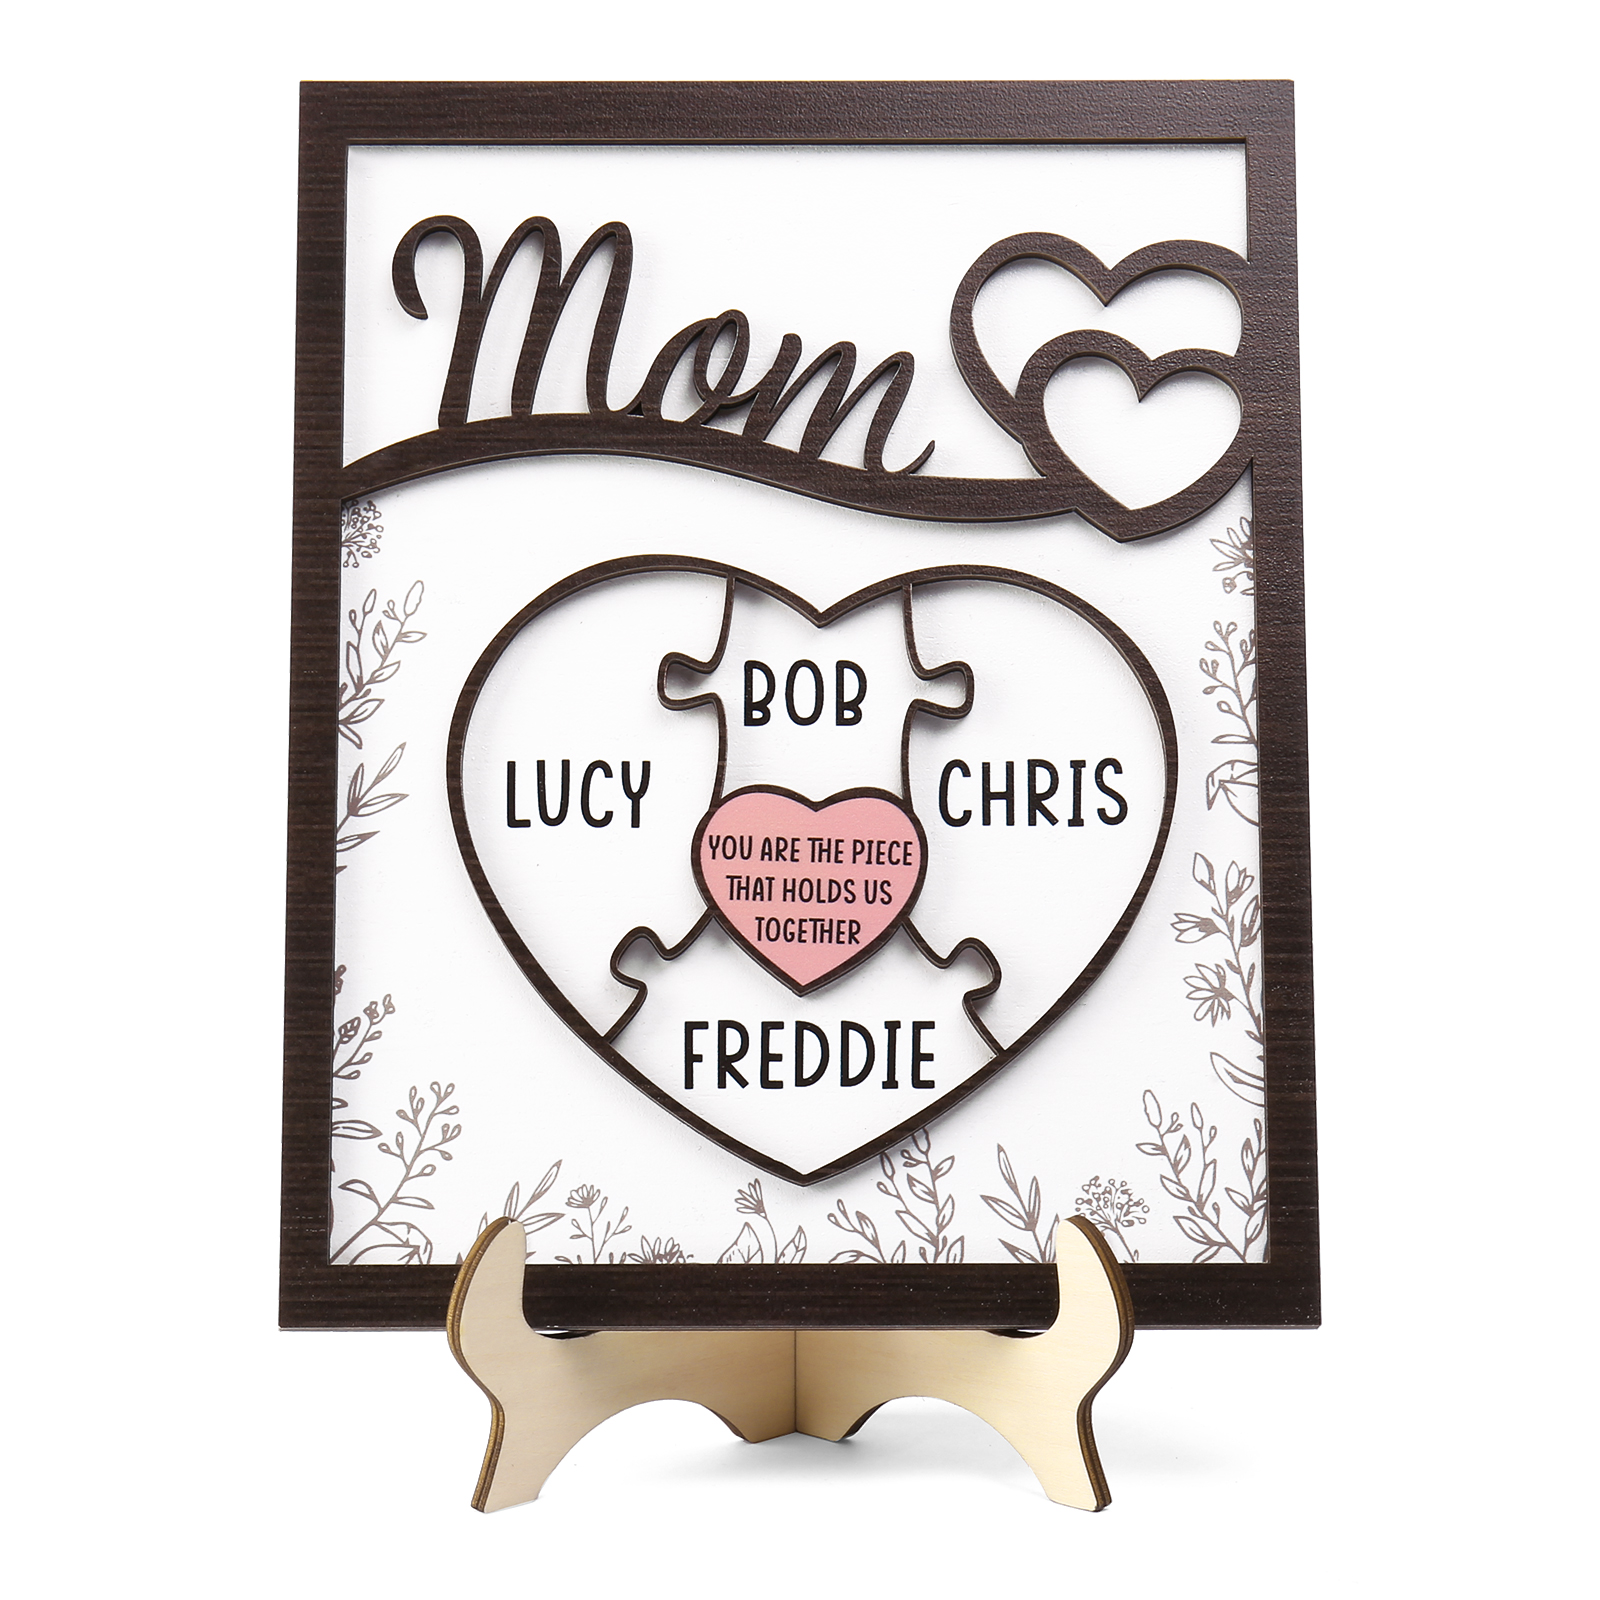 2 Names - Personalized Home Frame Wooden Ornaments Cute Bear Style Orn